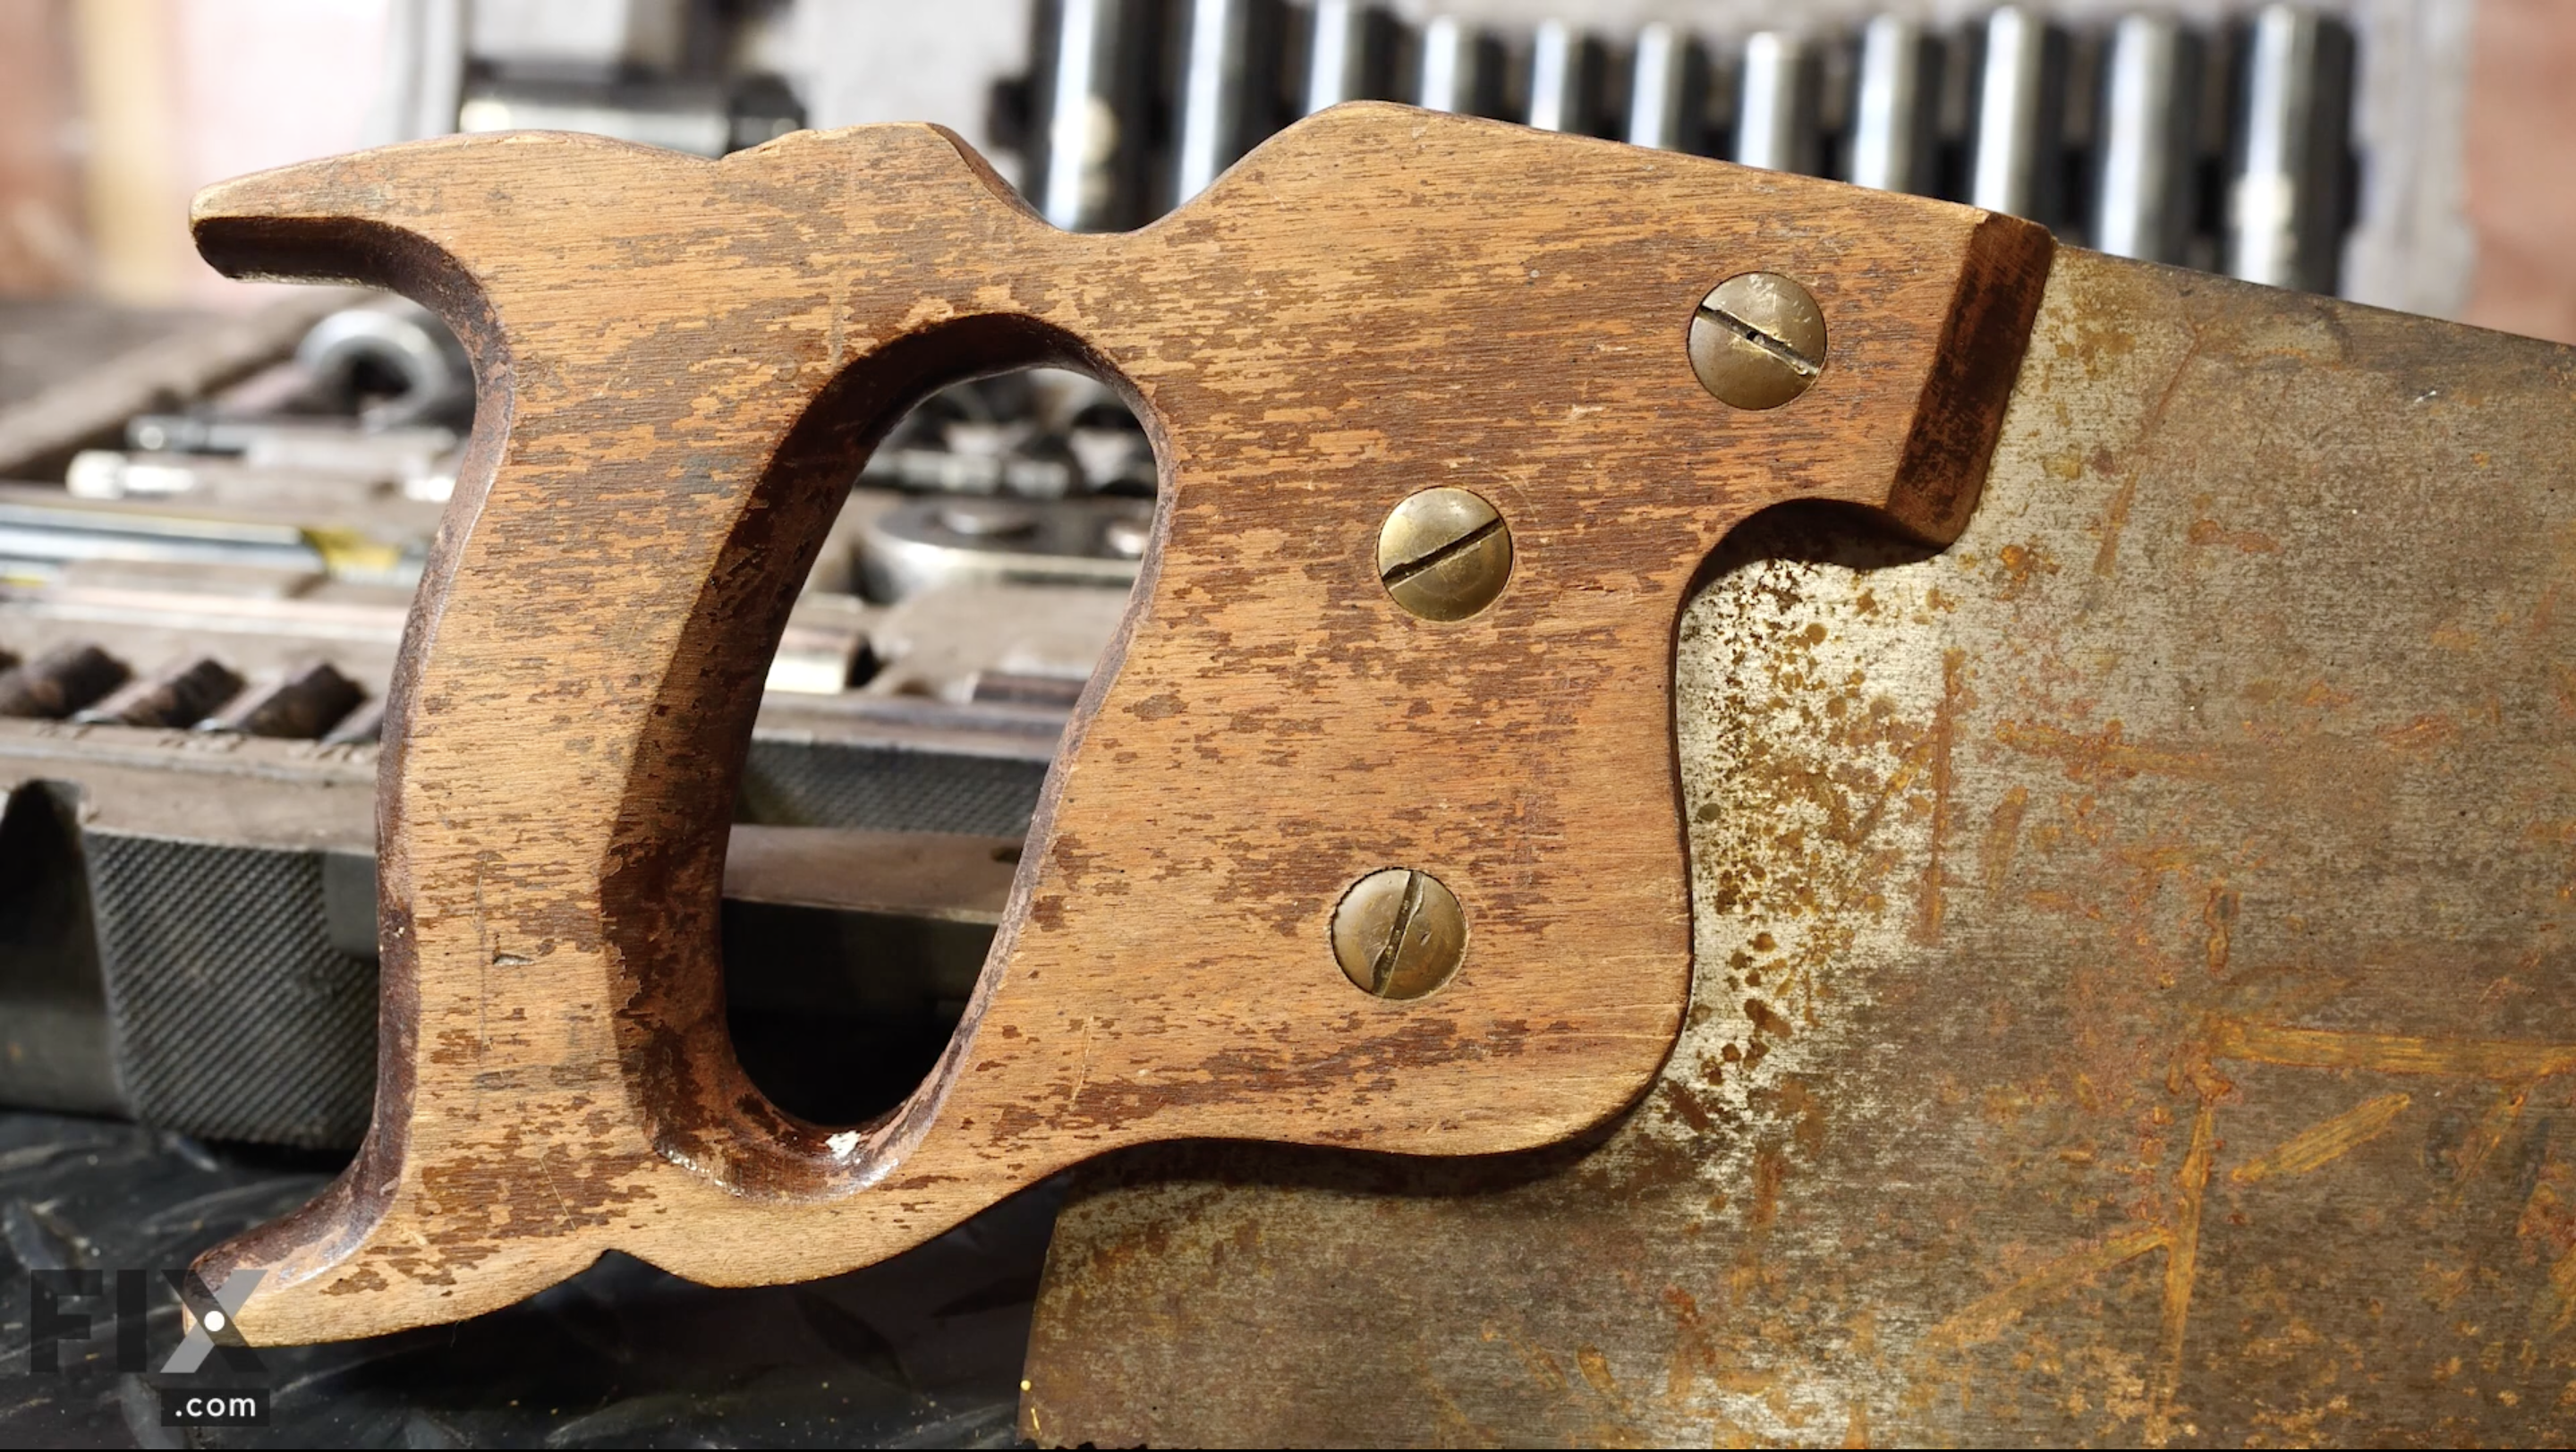 Old hand saw handle covered in rust, dirt and grime ready for a clean and complete restoration with a sanding and oil.